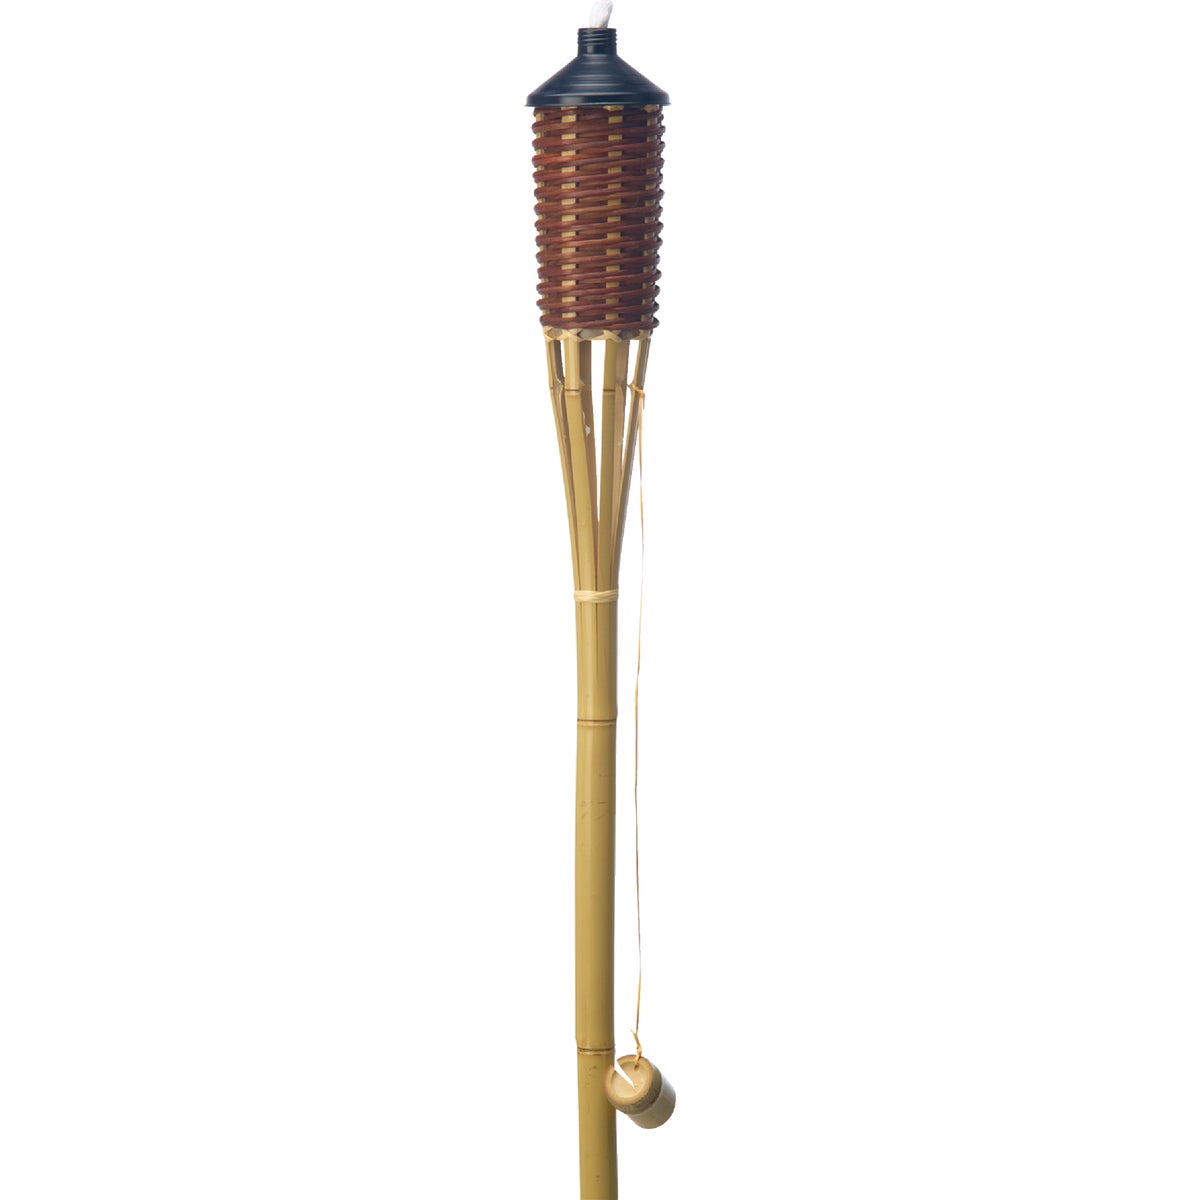 Outdoor Expressions 5 Ft. Brown Woven Bamboo Patio Torch